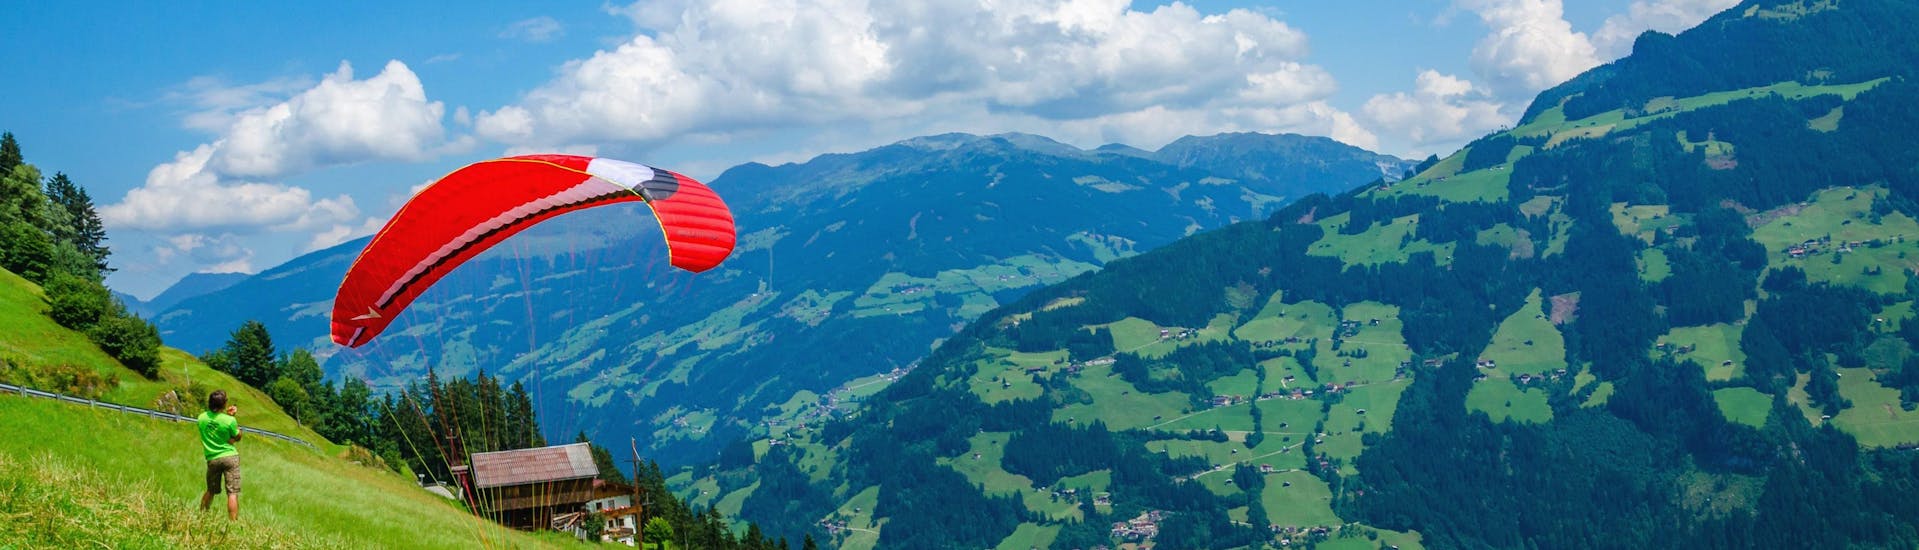 Beautiful view of the mountains of Zillertal, a popular region for paragliding.